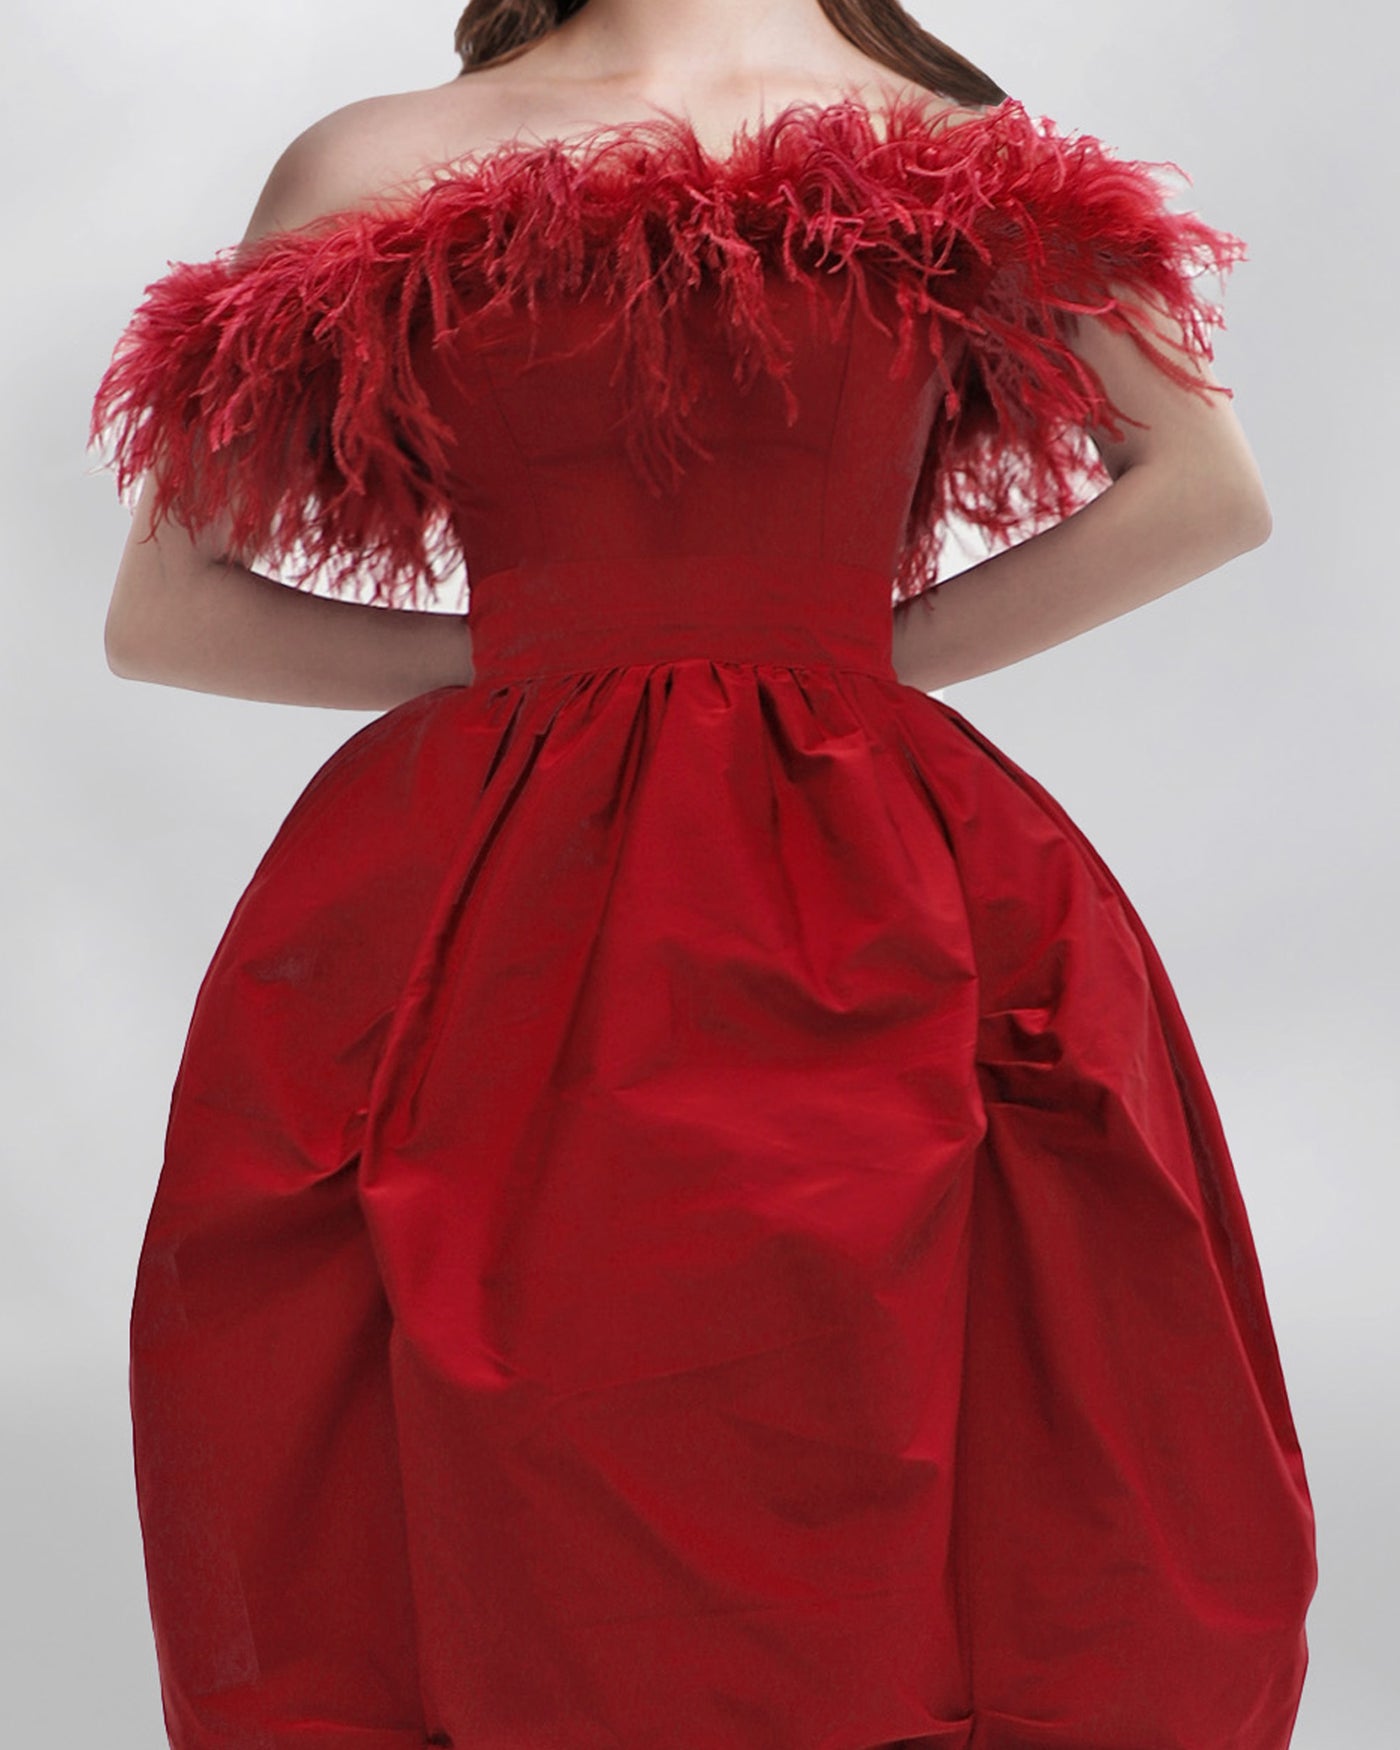 Feathered Puffed Red Dress